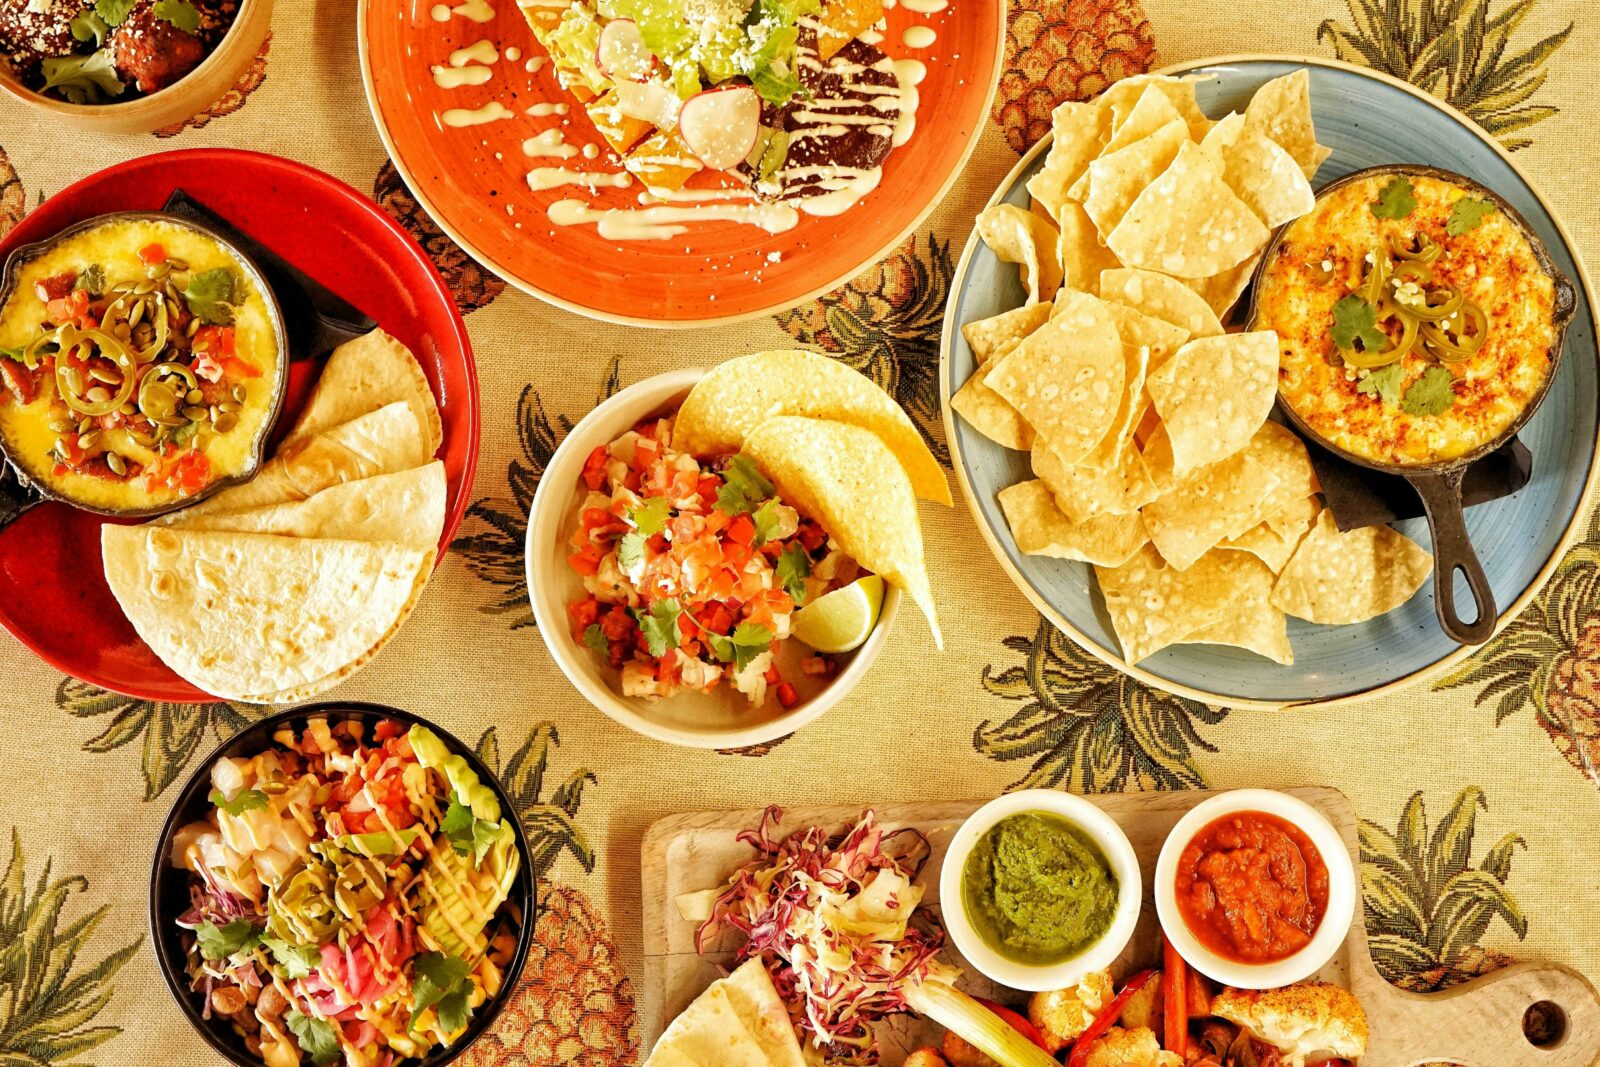 Range of Mexican dishes